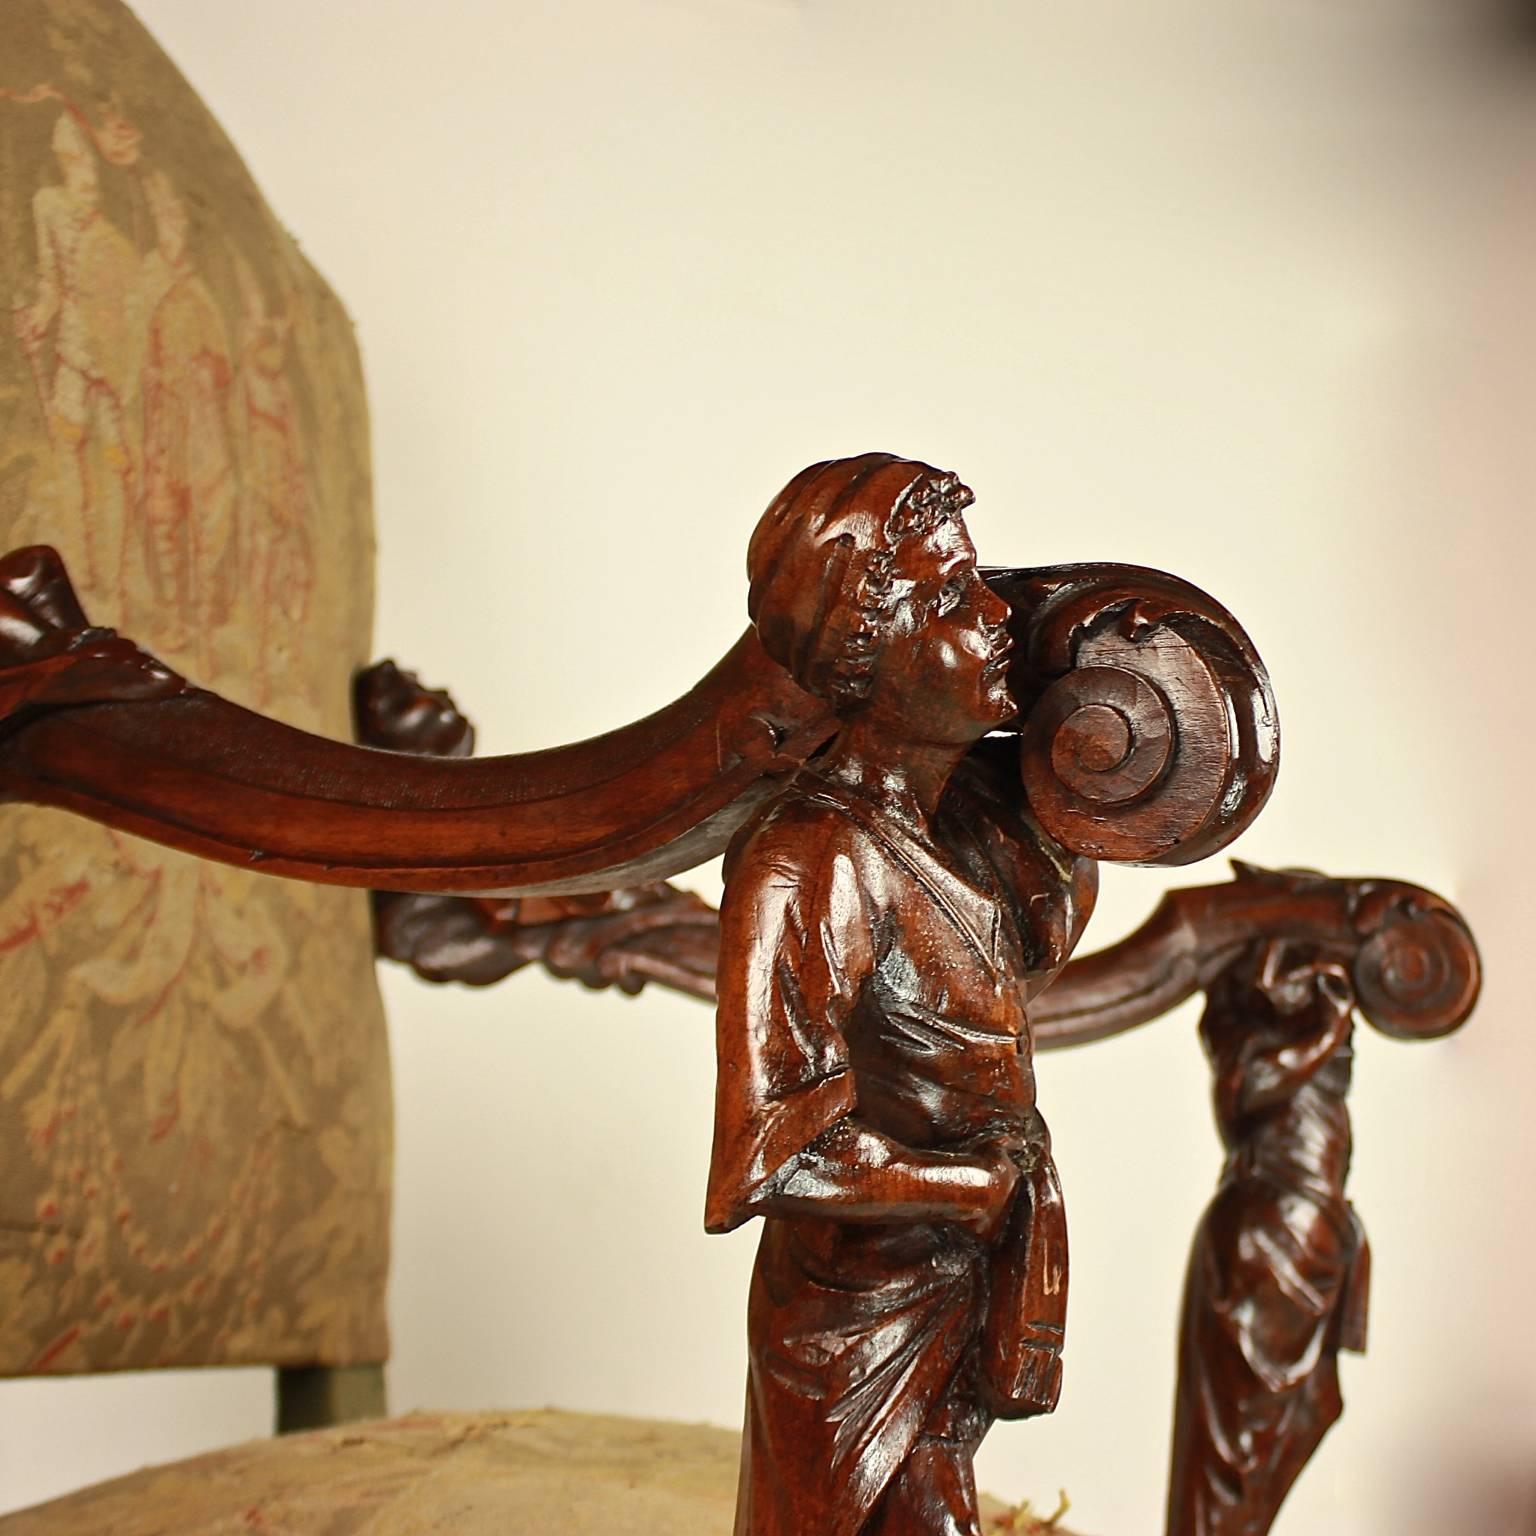 A large armchair of carved walnut, stained dark brown, with theatrically carved arm supports depicting neoclassical figures supporting the serpentine scrolling arms each carved with recumbent putti figures looking skyward. The front legs with